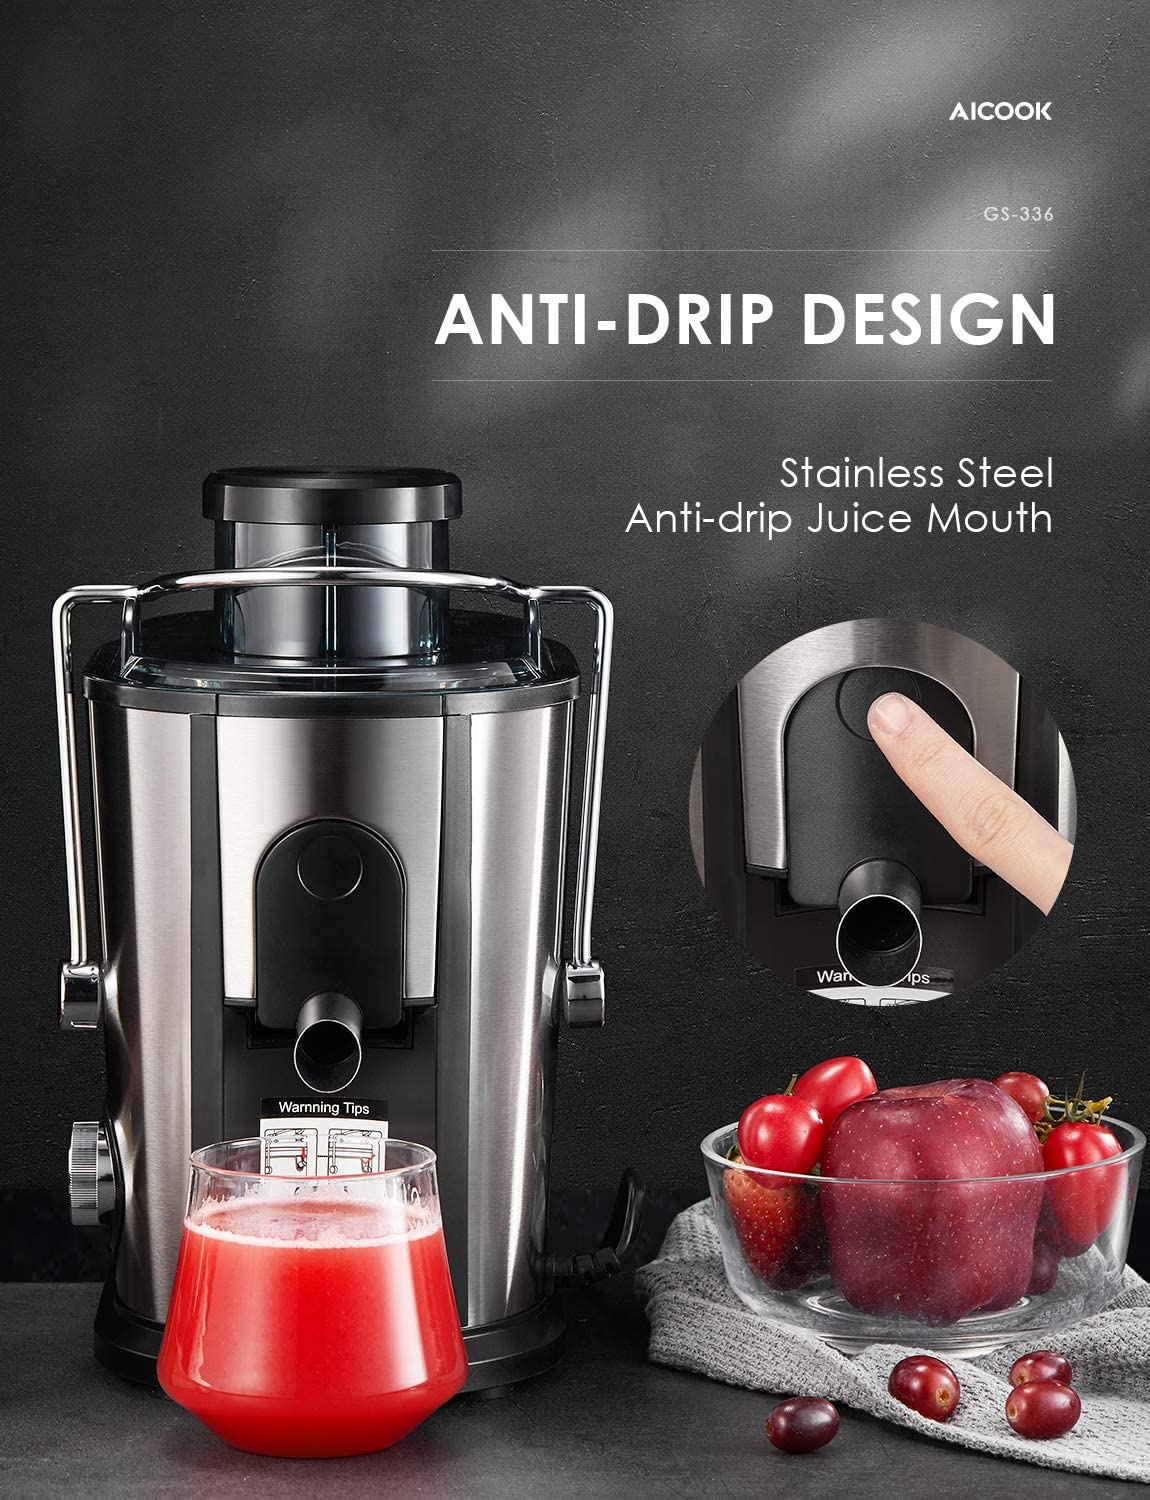 AICOOK | Juicer Wide Mouth Juice Extractor, Juicer Machines BPA Free Compact Fruits & Vegetables Juicer, Dual Speed Centrifugal Juicer with Non-drip Function, Stainless Steel Juicers Easy to Clean